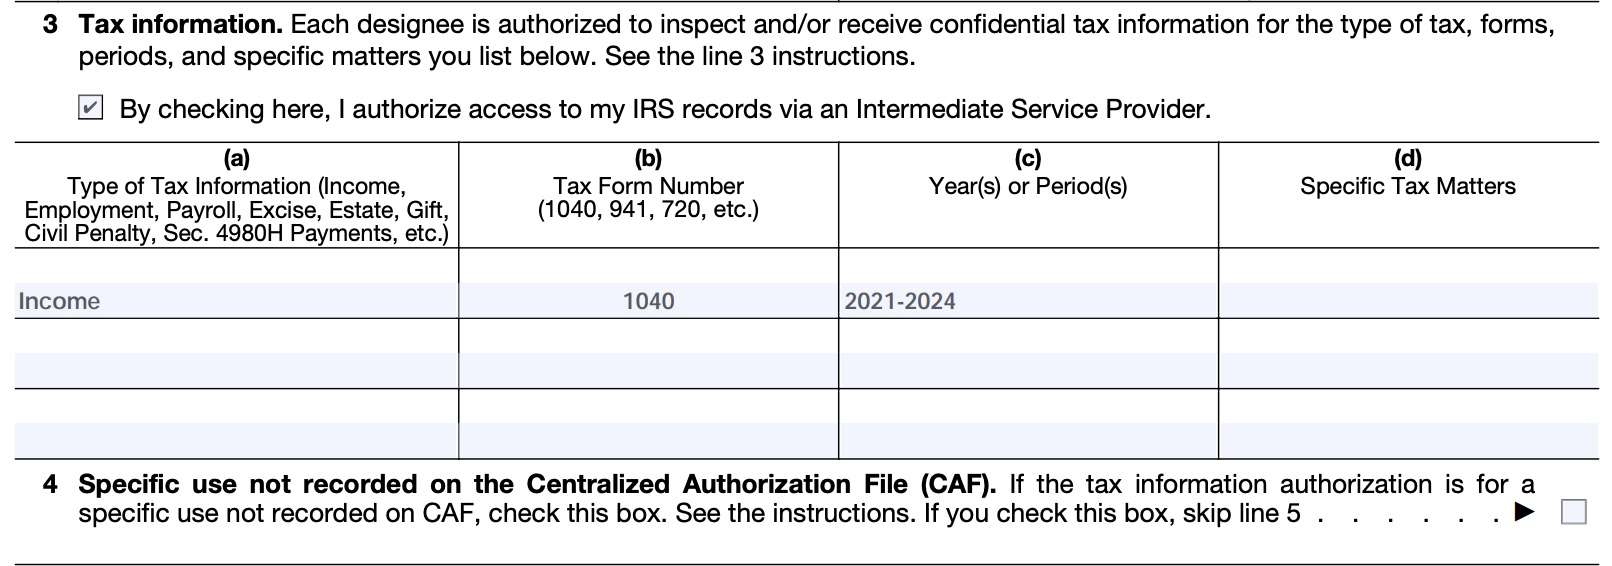 tax information authorization form, line 3, tax information, and line 4, specific use not recorded on the CAF